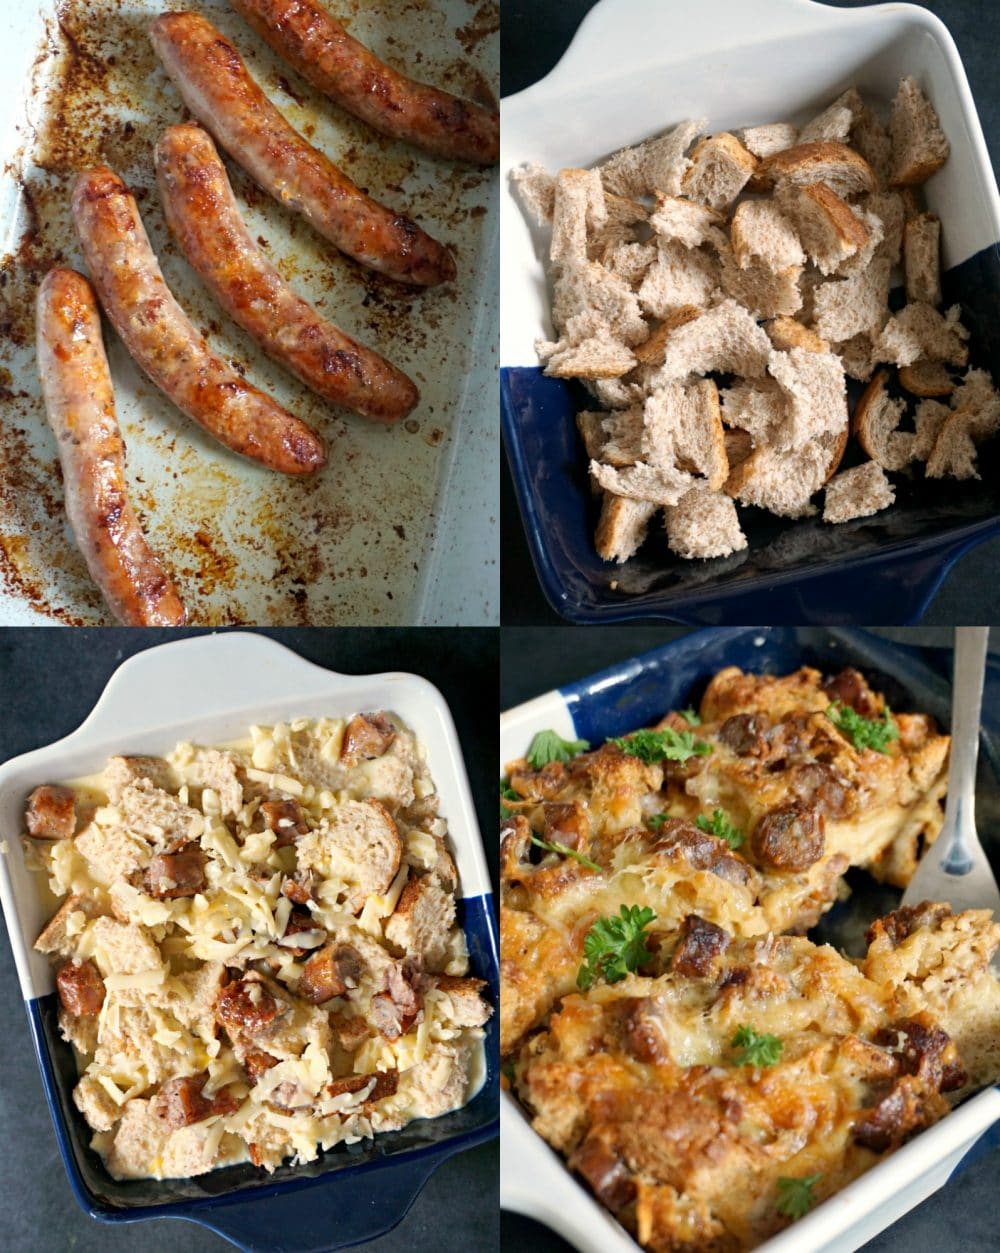 Collage of 4 photos to show how to make breakfast casserole.